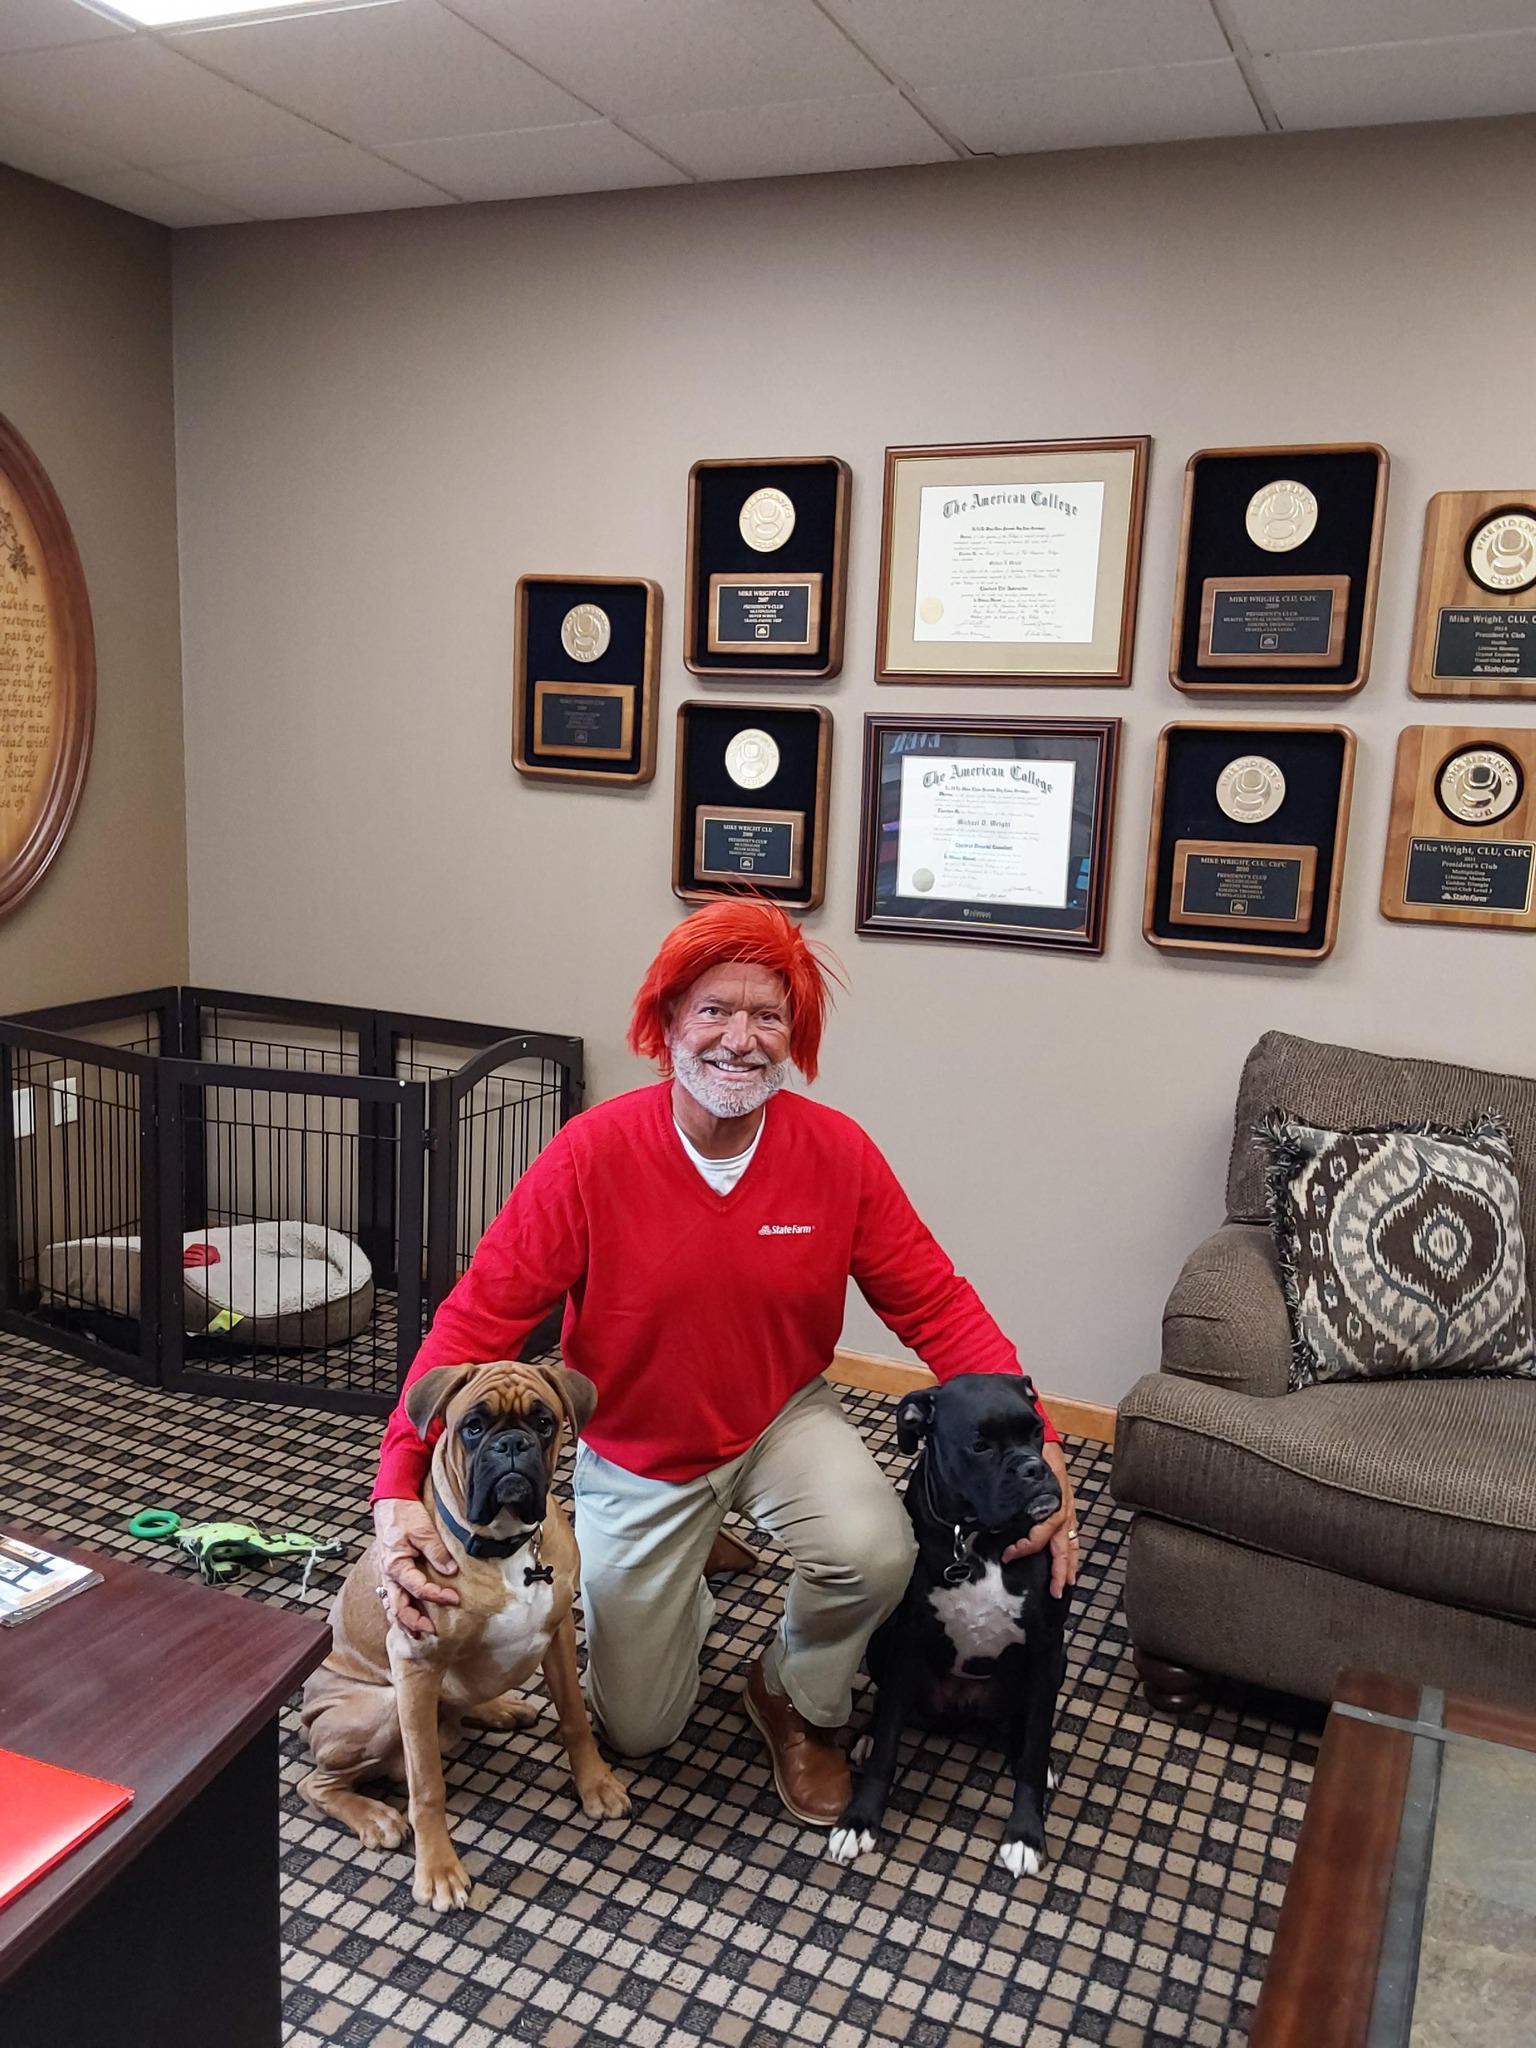 Just a man and his dog! Visit our State Farm office today for a free insurance quote!